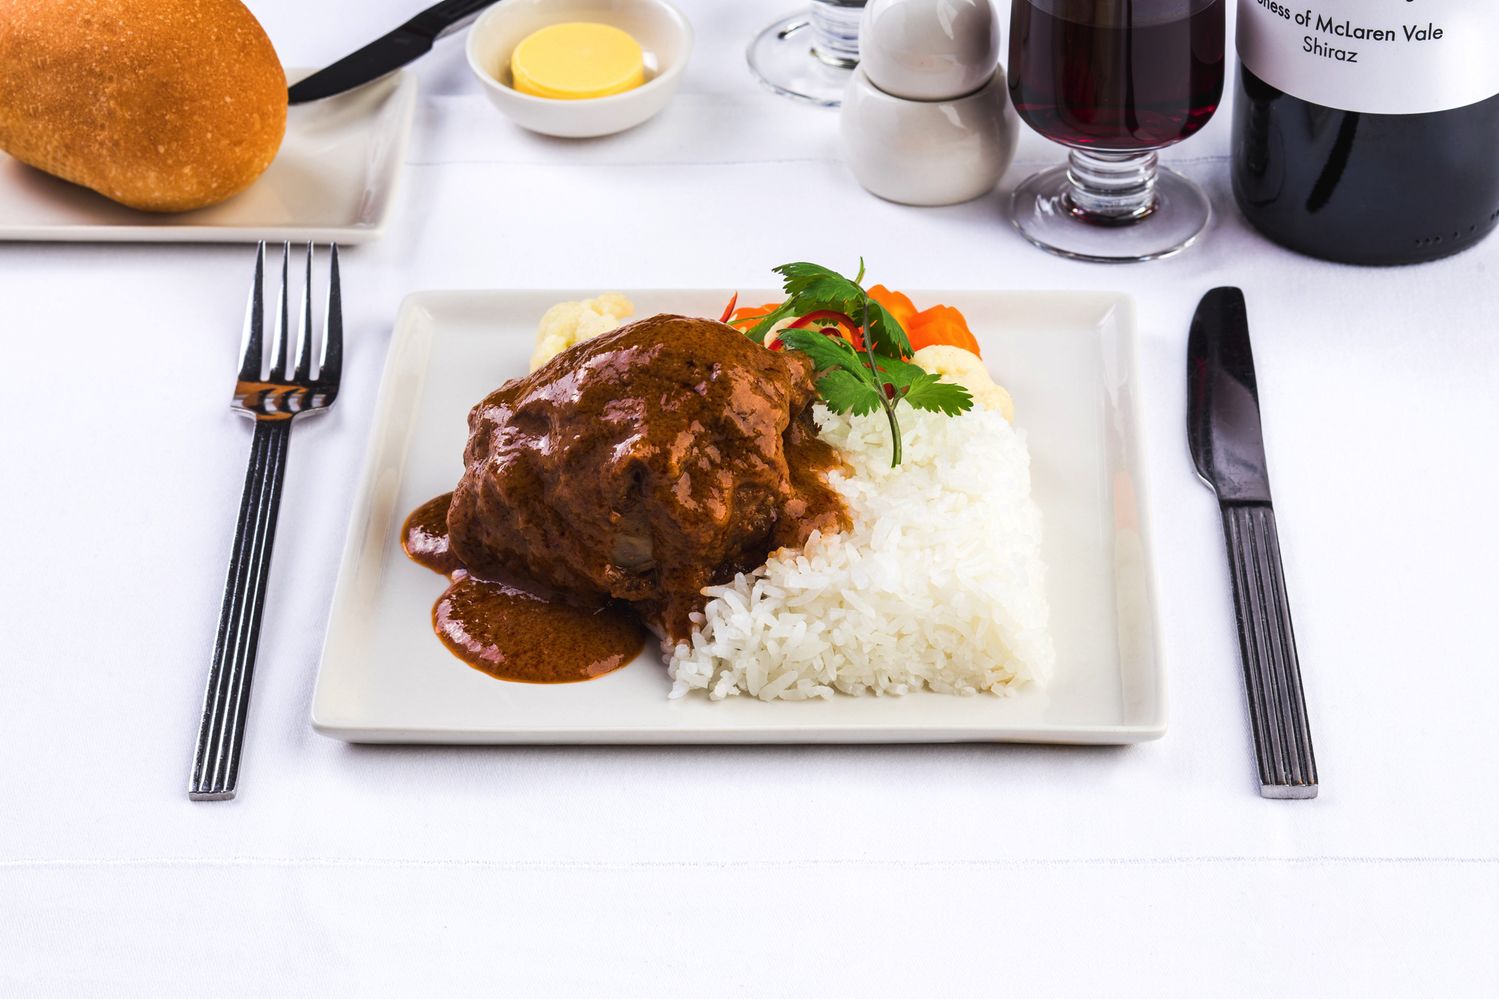 Lamb shank Rendang: slow-cooked Australian Lamb combines fragrant spices “pemasak” and coconut cream to achieve a rich favour. Accompanied by fragrant steamed jasmine rice and vegetables.